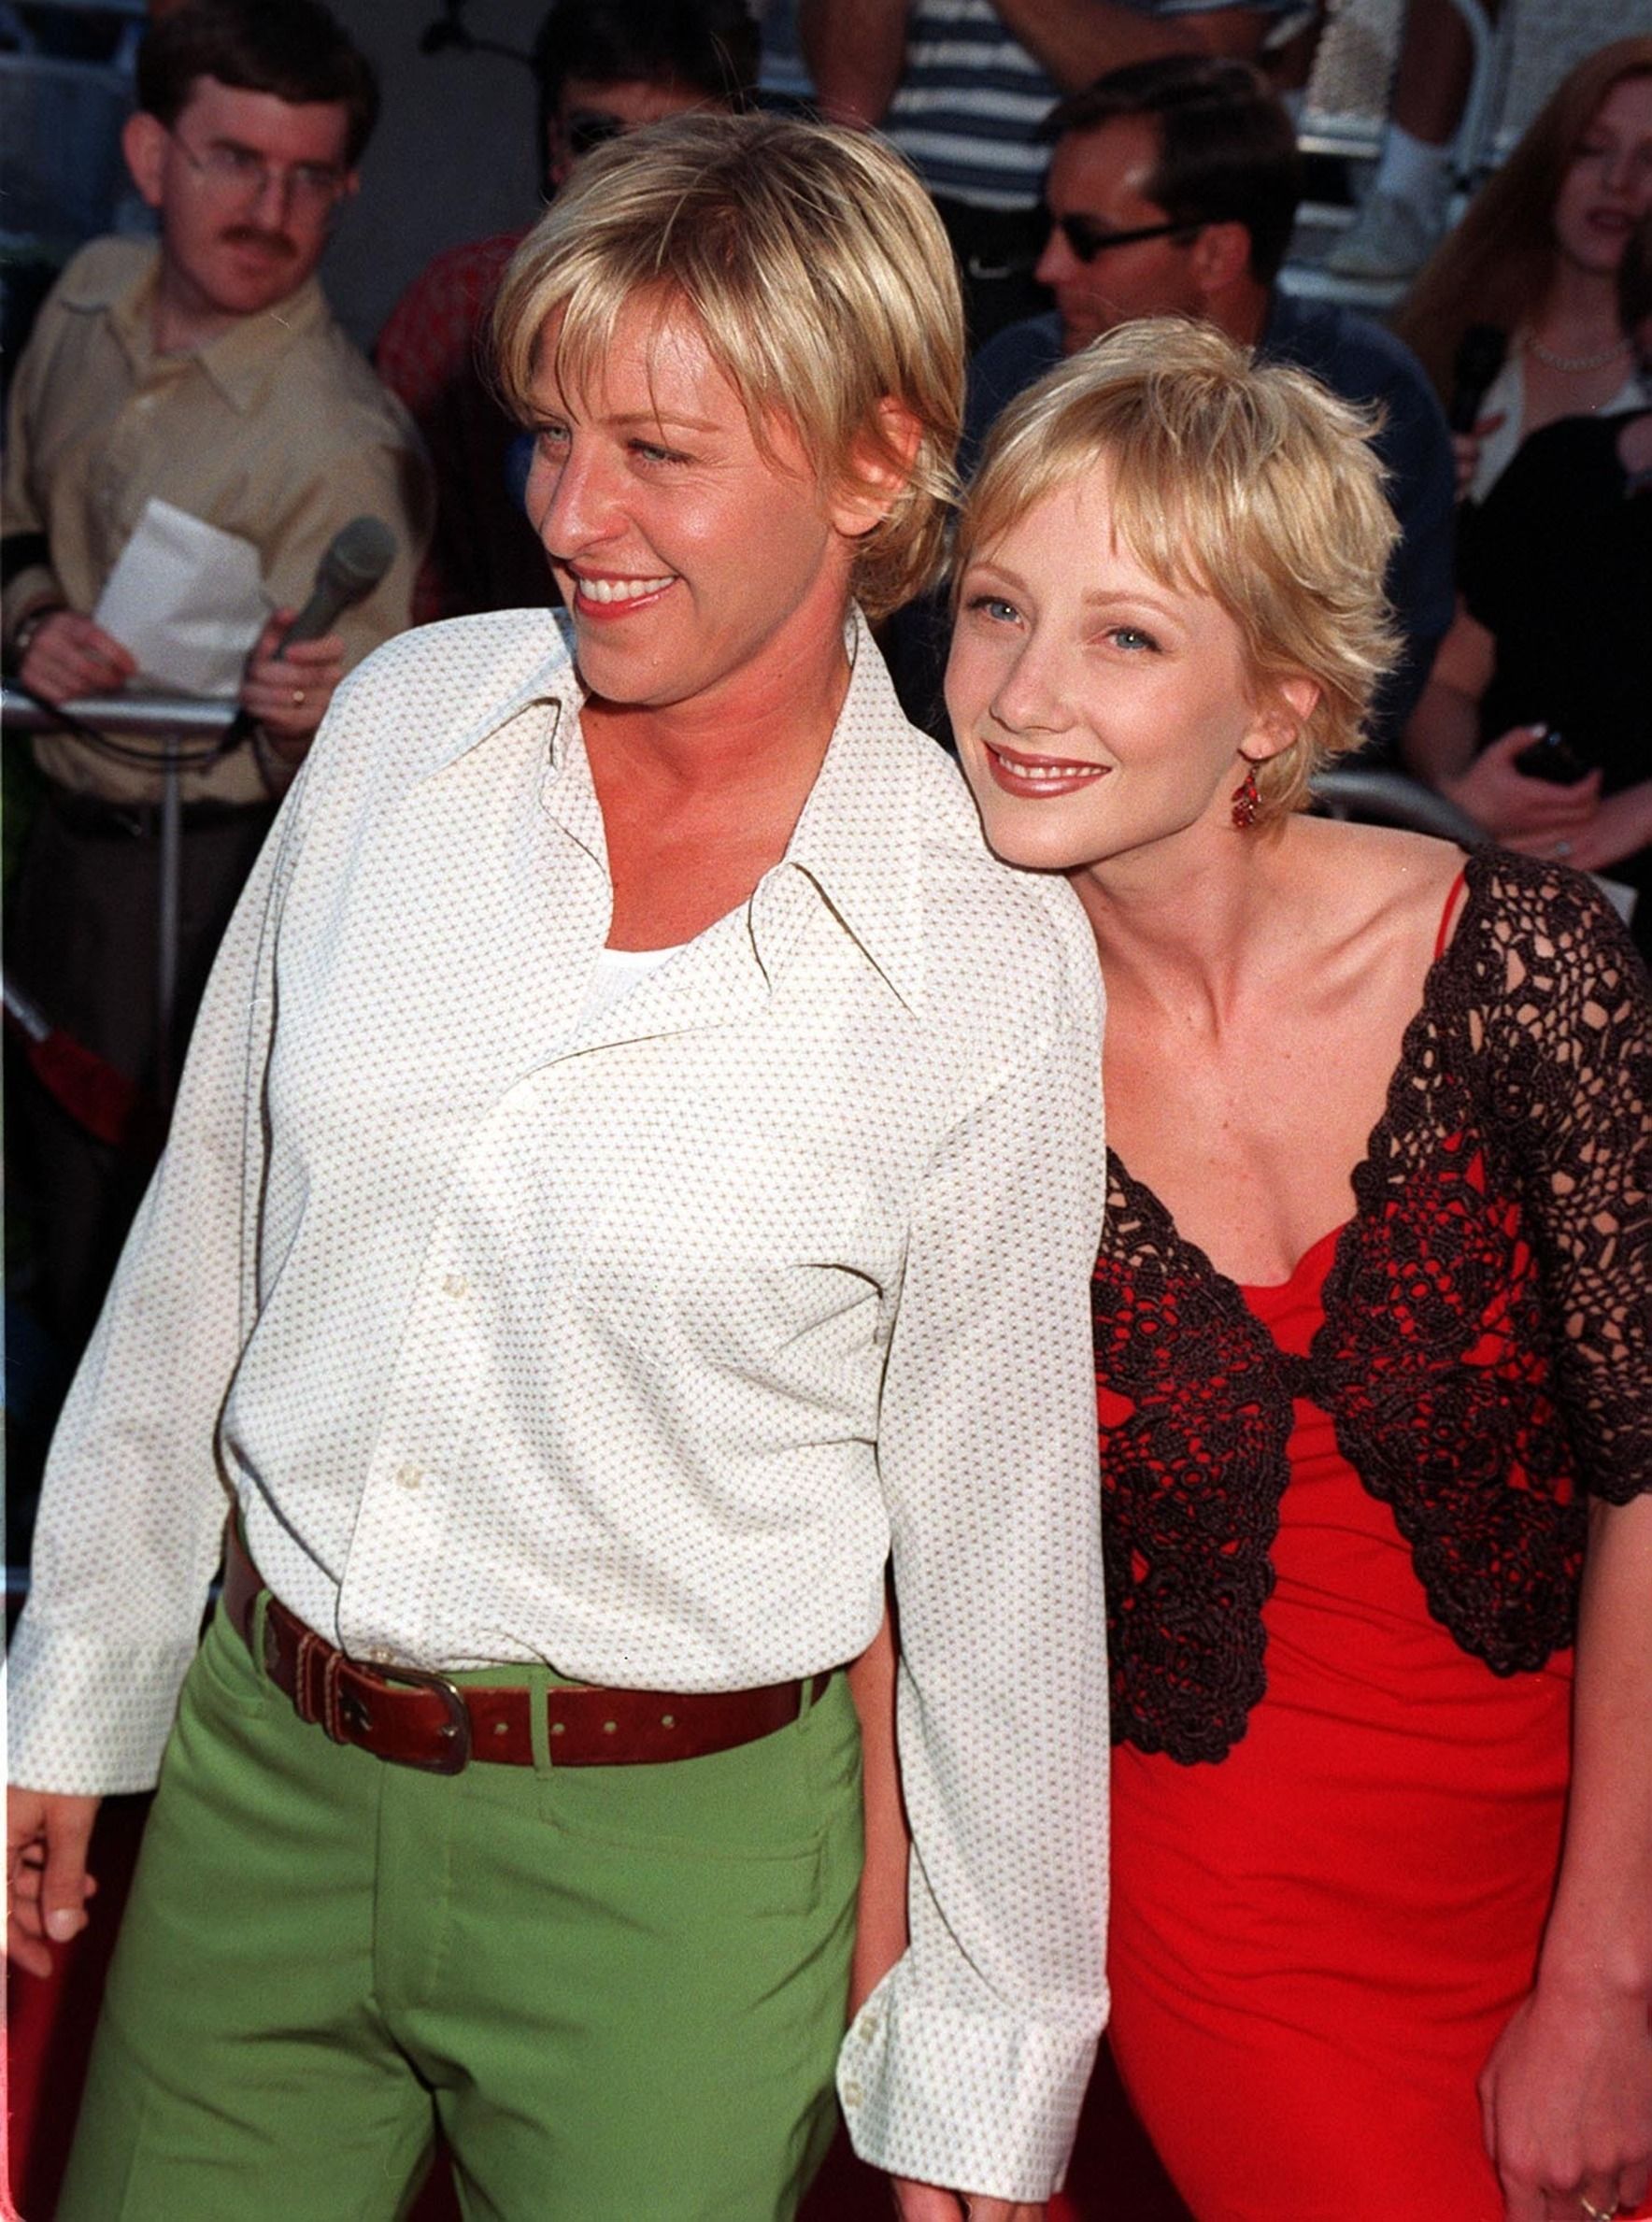 Anne Heche and Ellen DeGeneres at the premiere of "Contact," July 1, 1997. | Source: Shutterstock